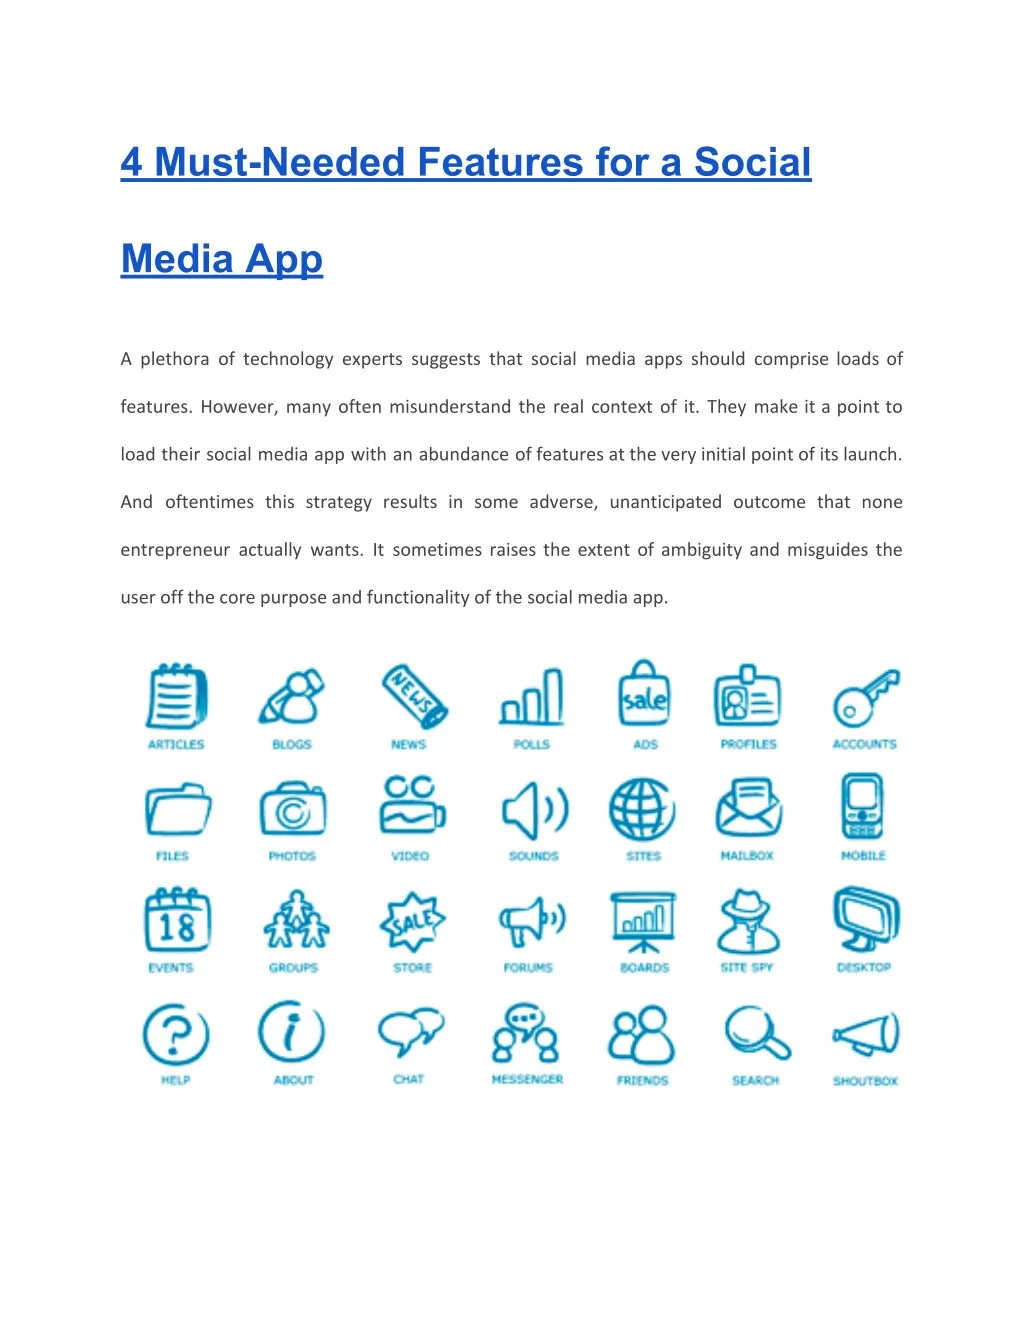 4 must needed features for a social